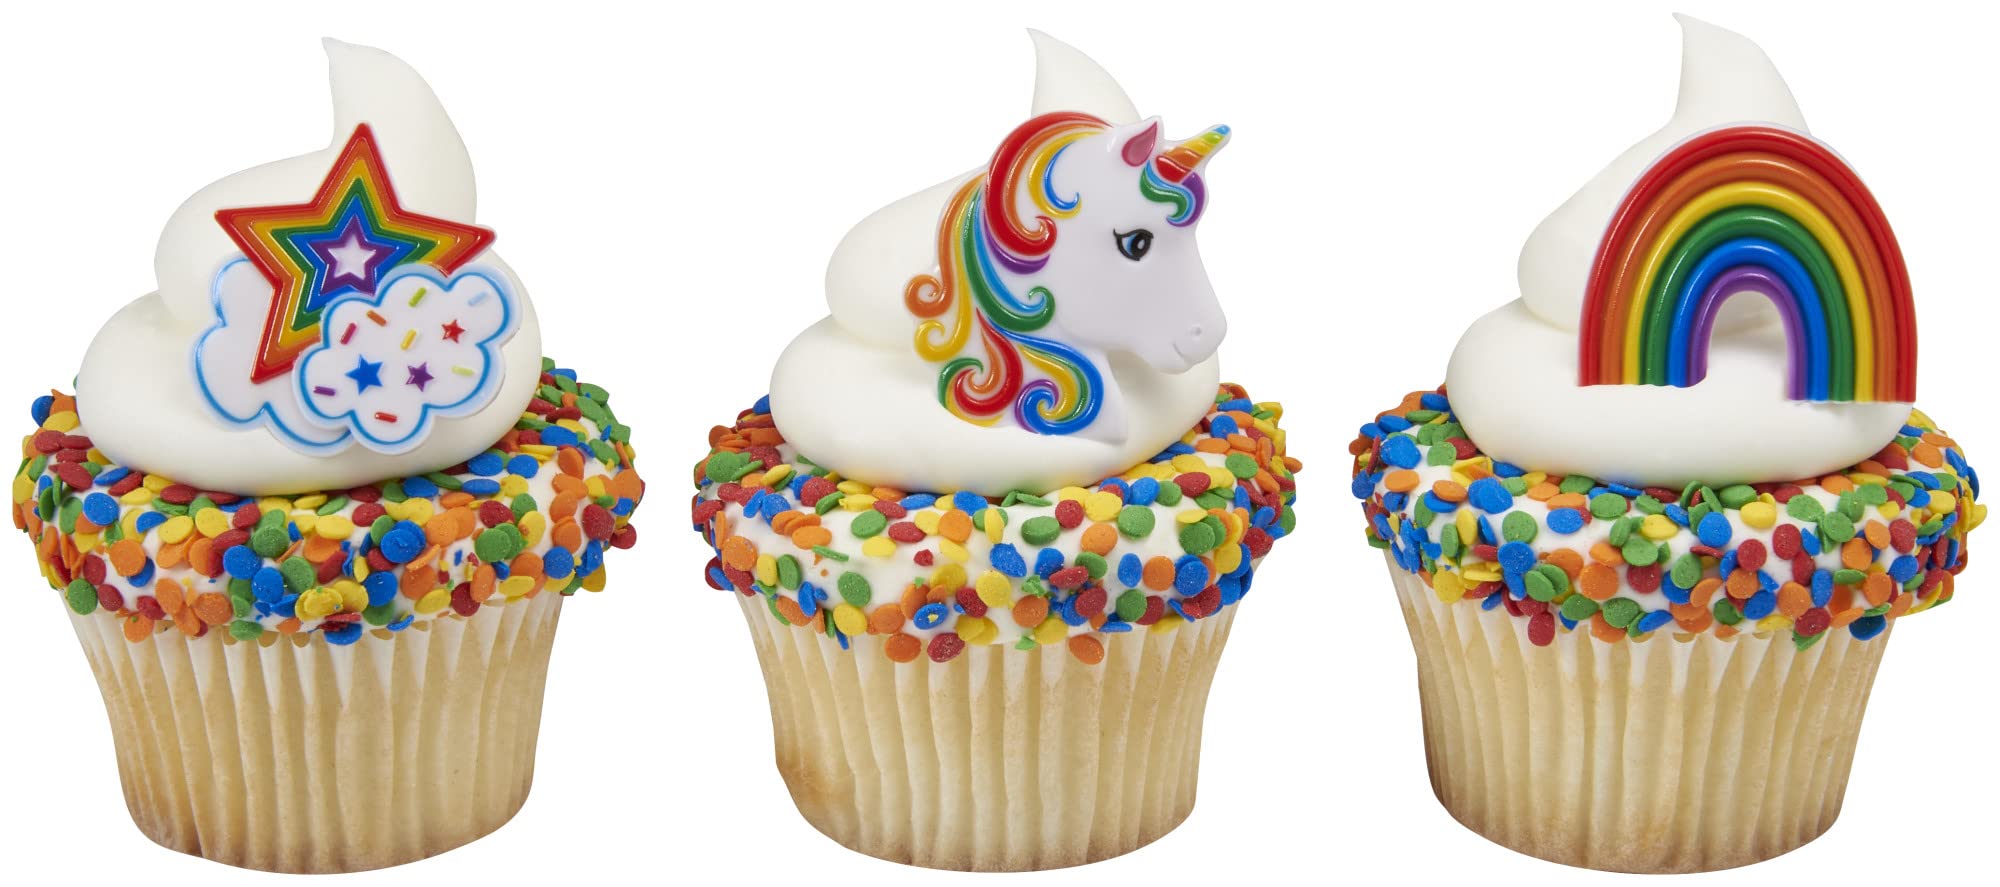 DECOPAC Rainbow Unicorn Rings, Cupcake Decorations, Magical Food Safe Cake Toppers – 24 Pack, Multicolor